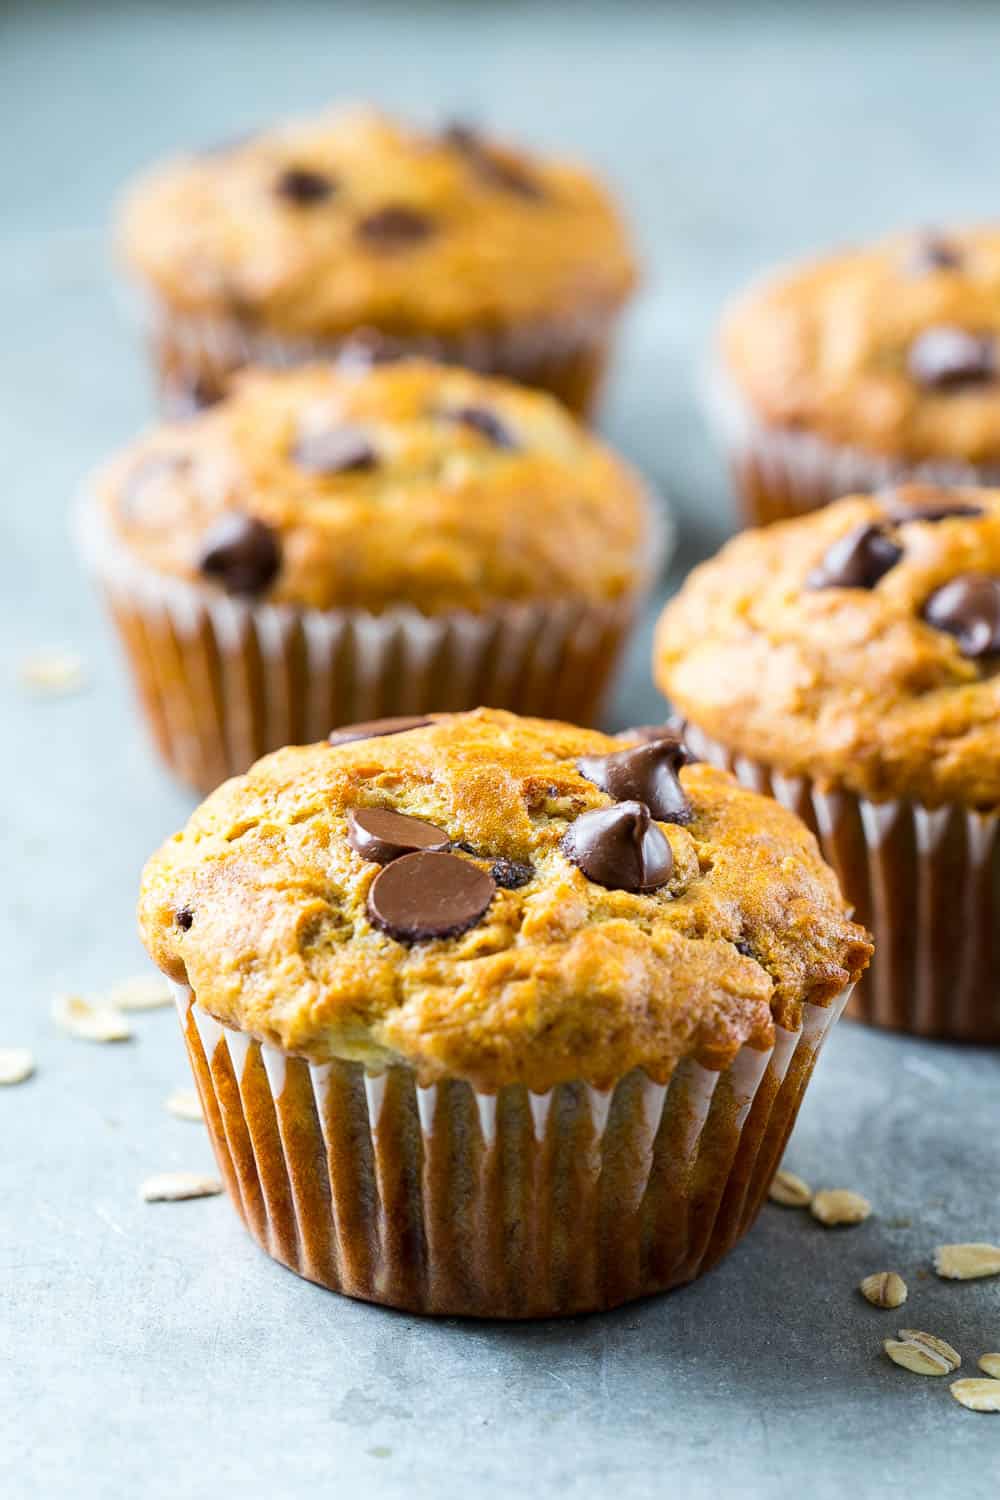 Banana Oatmeal Chocolate Chip Muffins Recipe  Healthy Fitness Meals